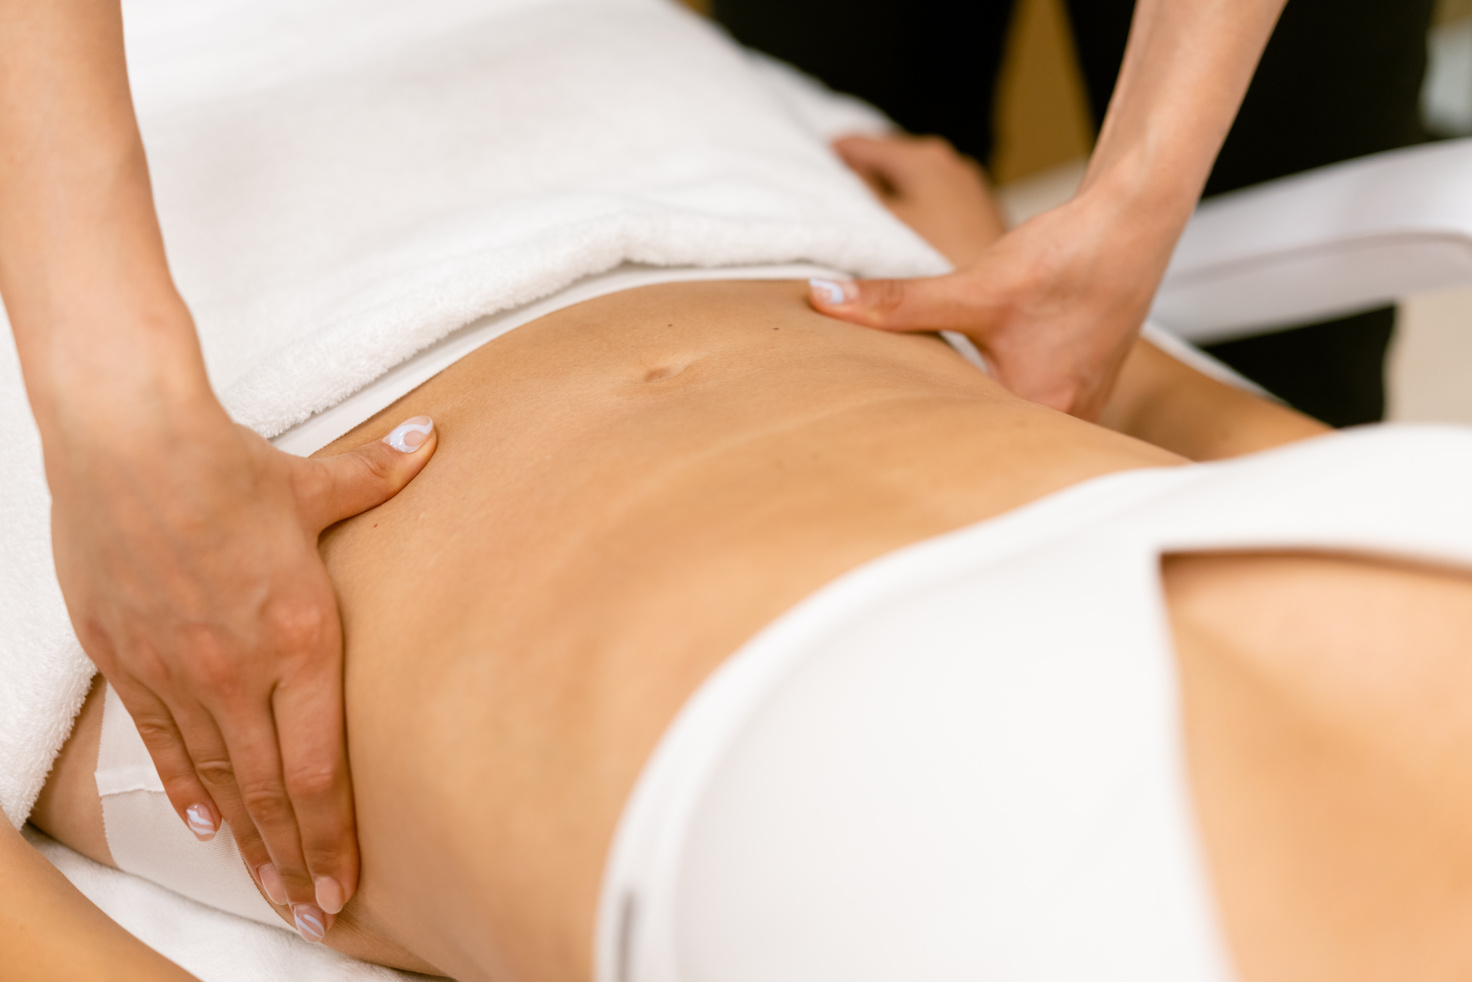 Middle-Aged Woman Having a Belly Massage in a Beauty Salon.